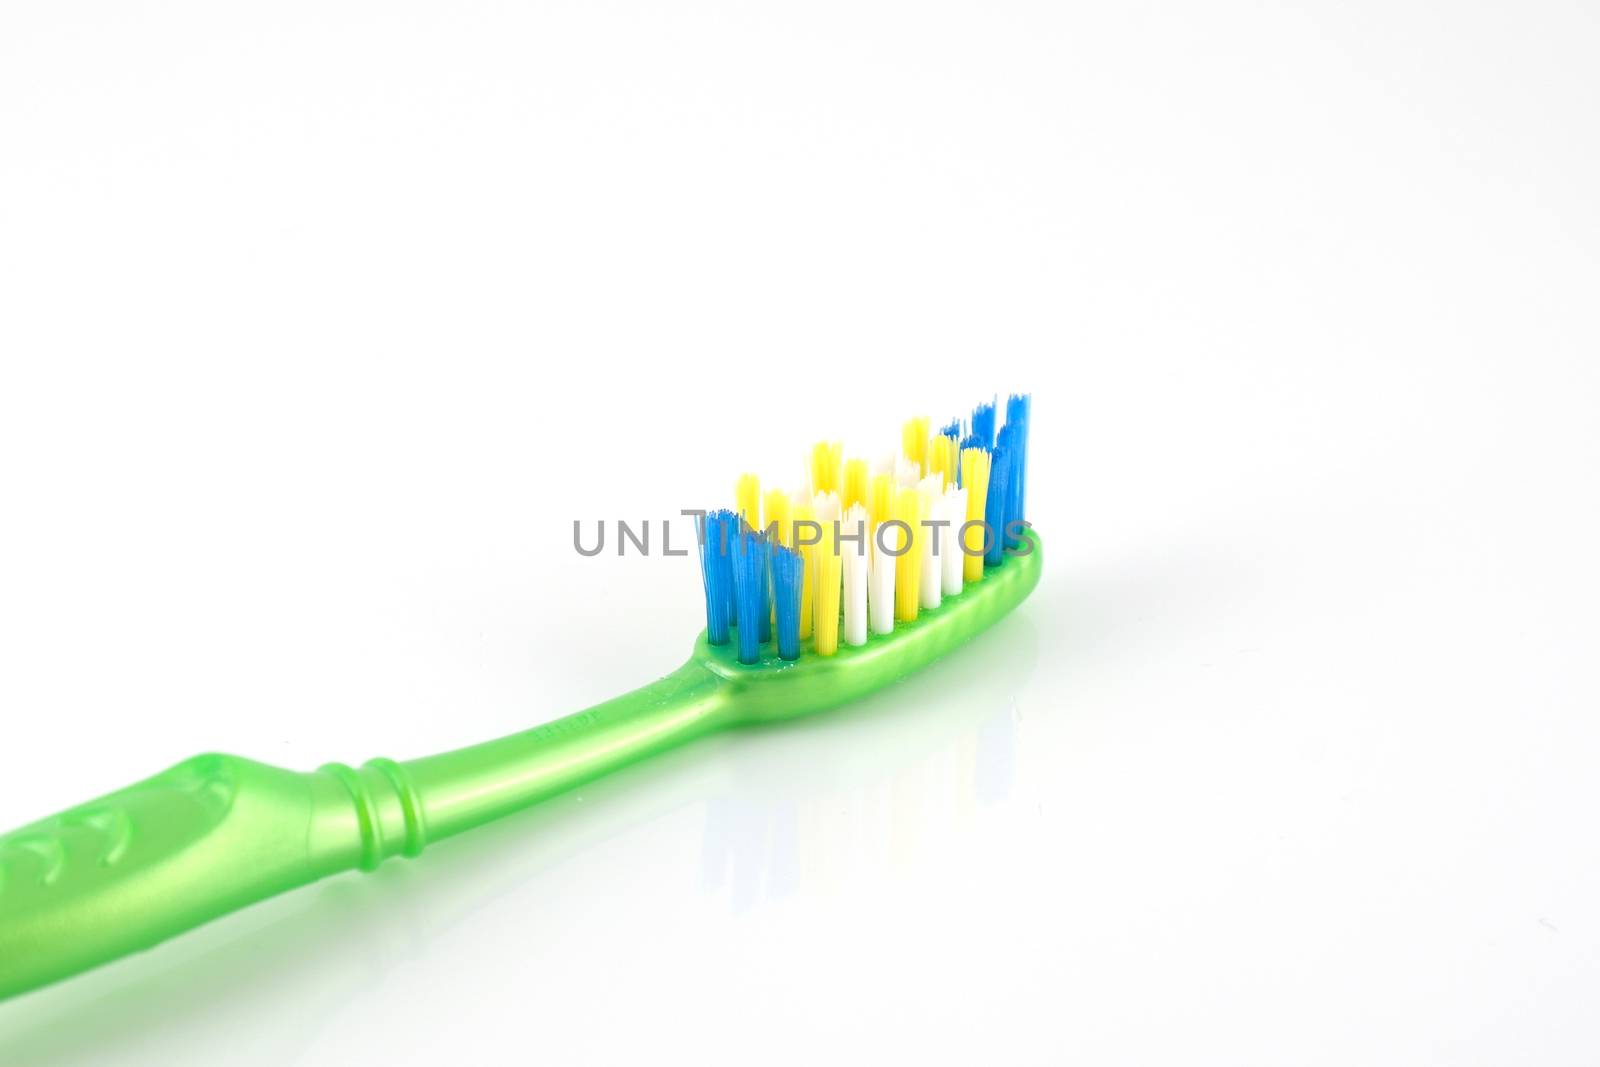 Tooth-brush with green handle over white